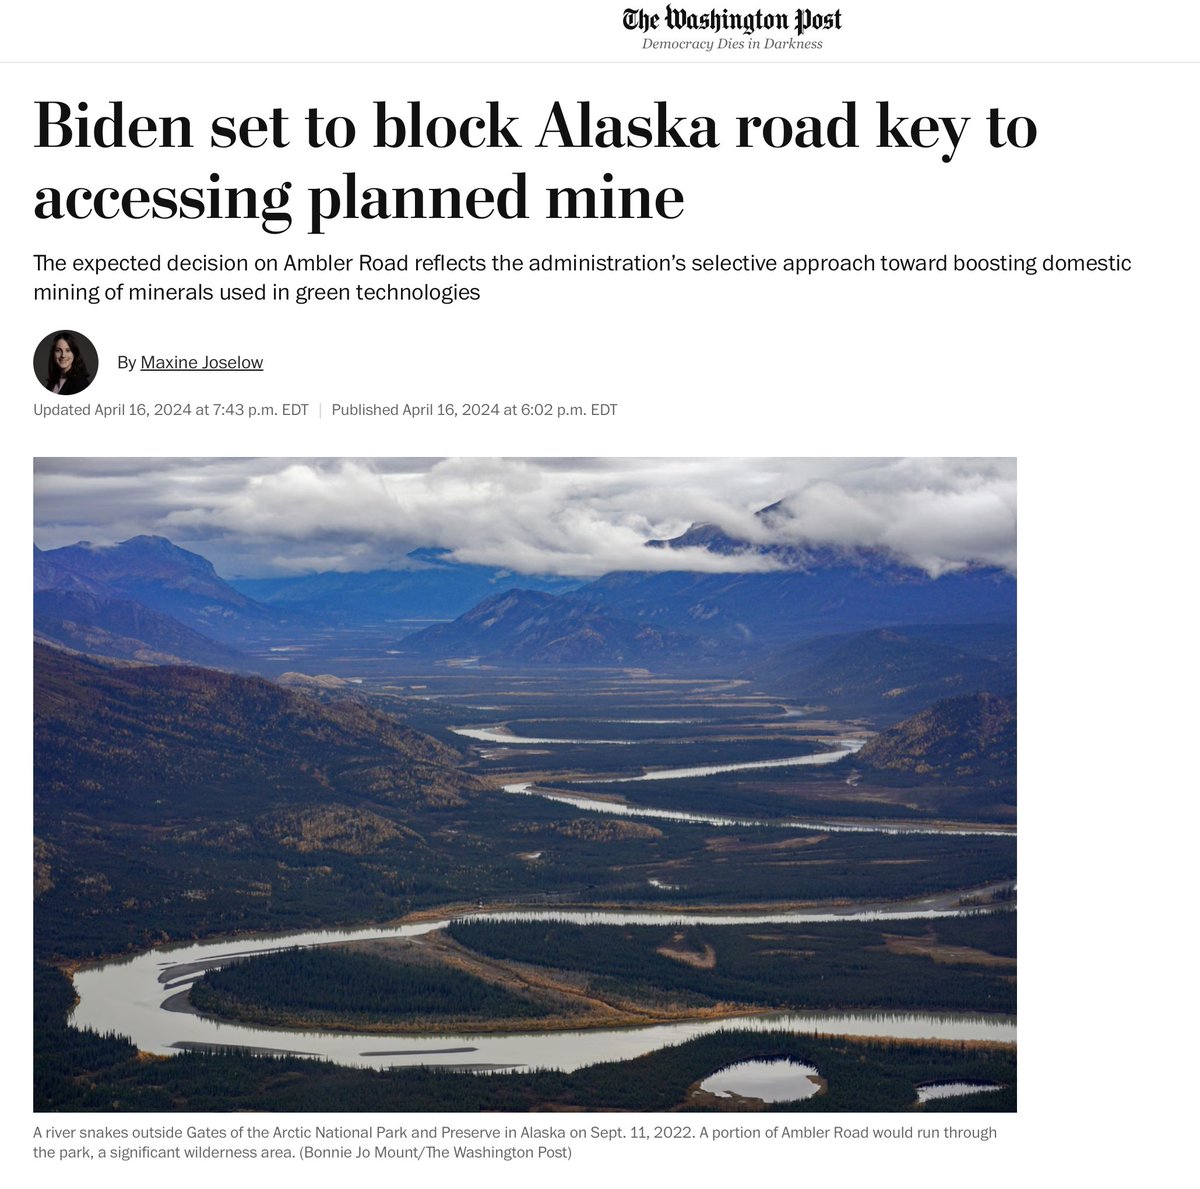 Joe Biden's suicidal climate hypocrisy:

1. Blocks copper-cobalt-zinc mine in Alaska needed for  wind/solar/EV mandates.

2. Yet continues pushing wind/solar/EV mandates, keeping the US dependent on Communist China for needed metals/minerals.

3. When the Chinese finally enslave…